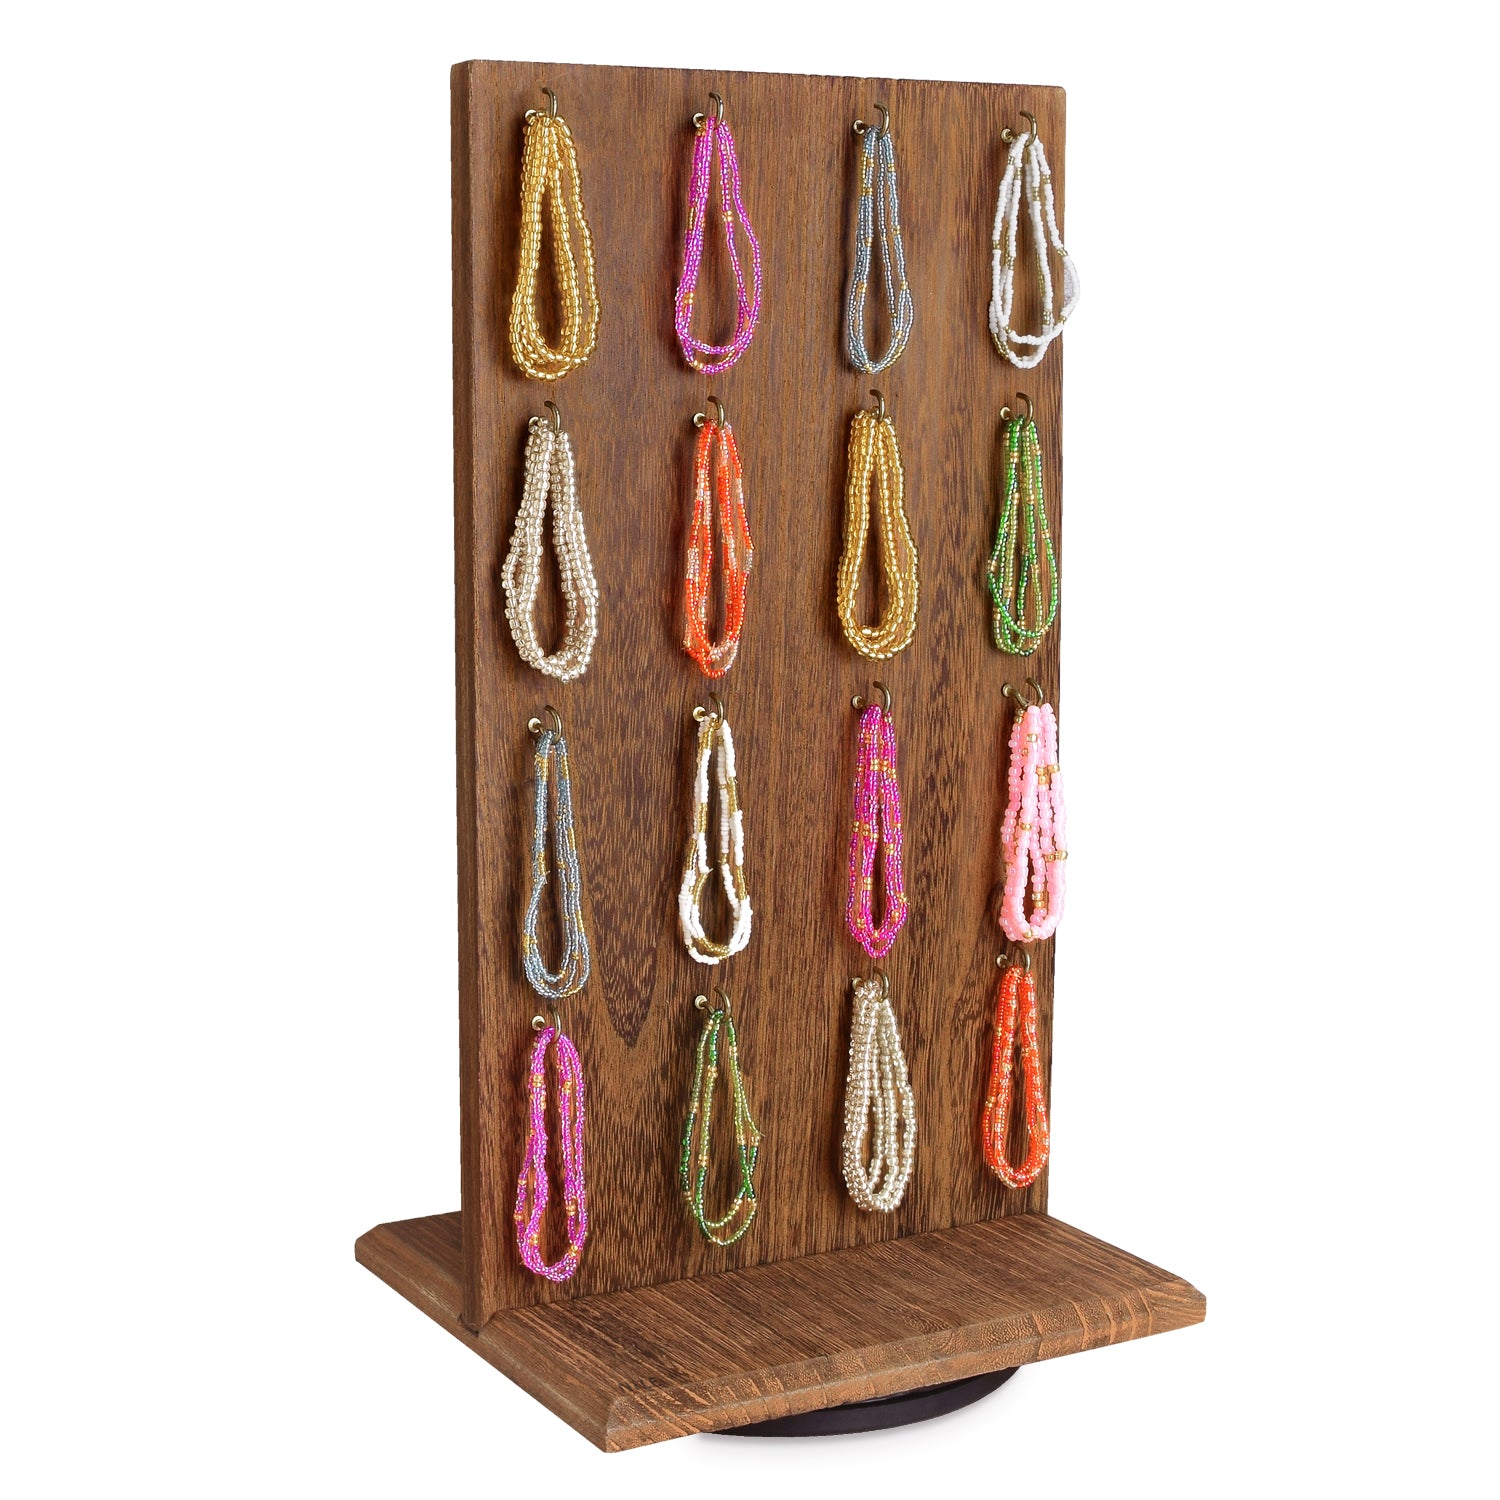 Earring Display Stand - with hooks and earring cards - store display, craft  fair | eBay